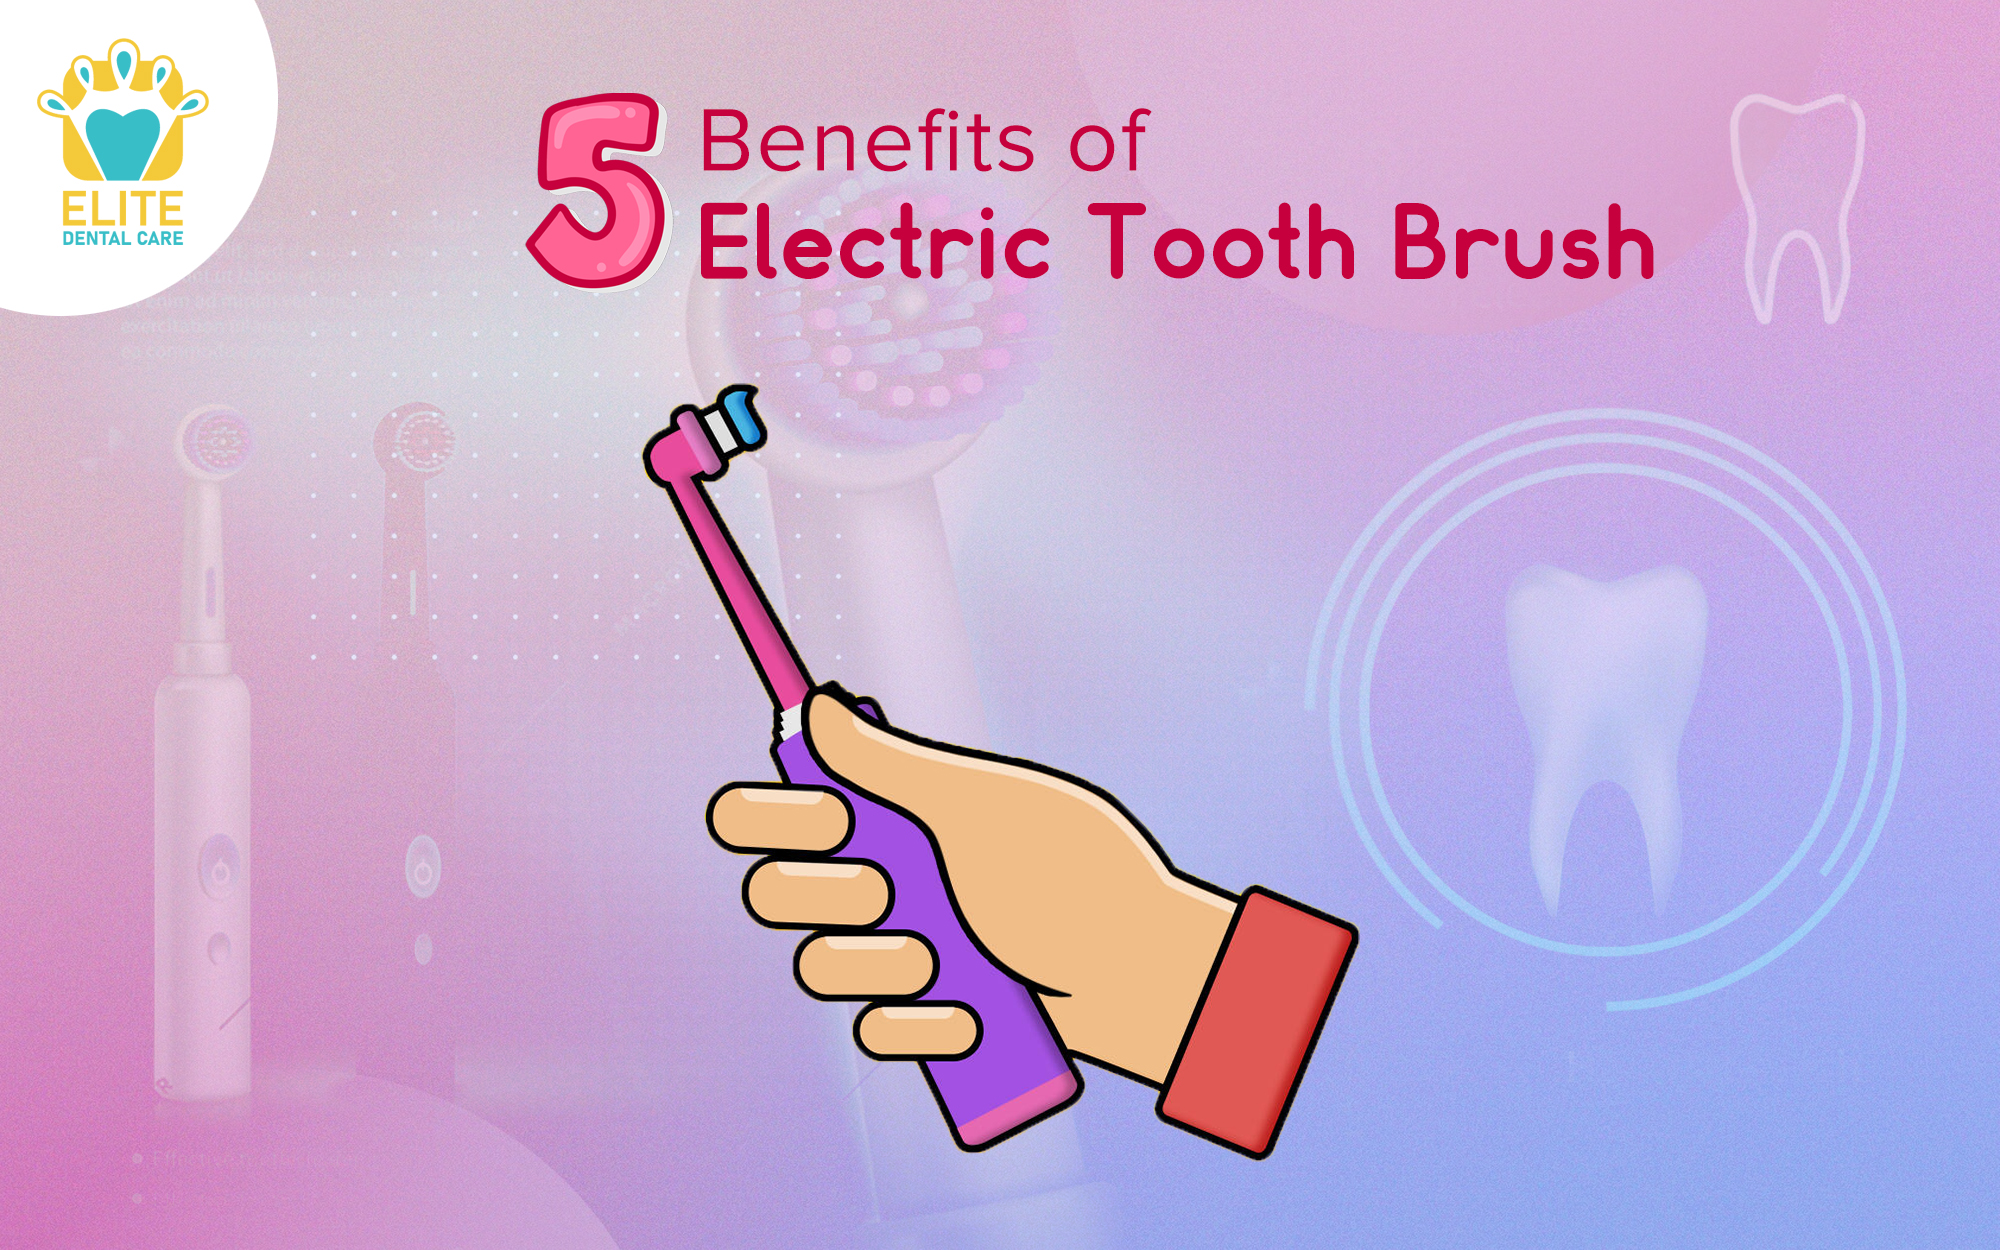 BENEFITS OF ELECTRIC TOOTHBRUSH